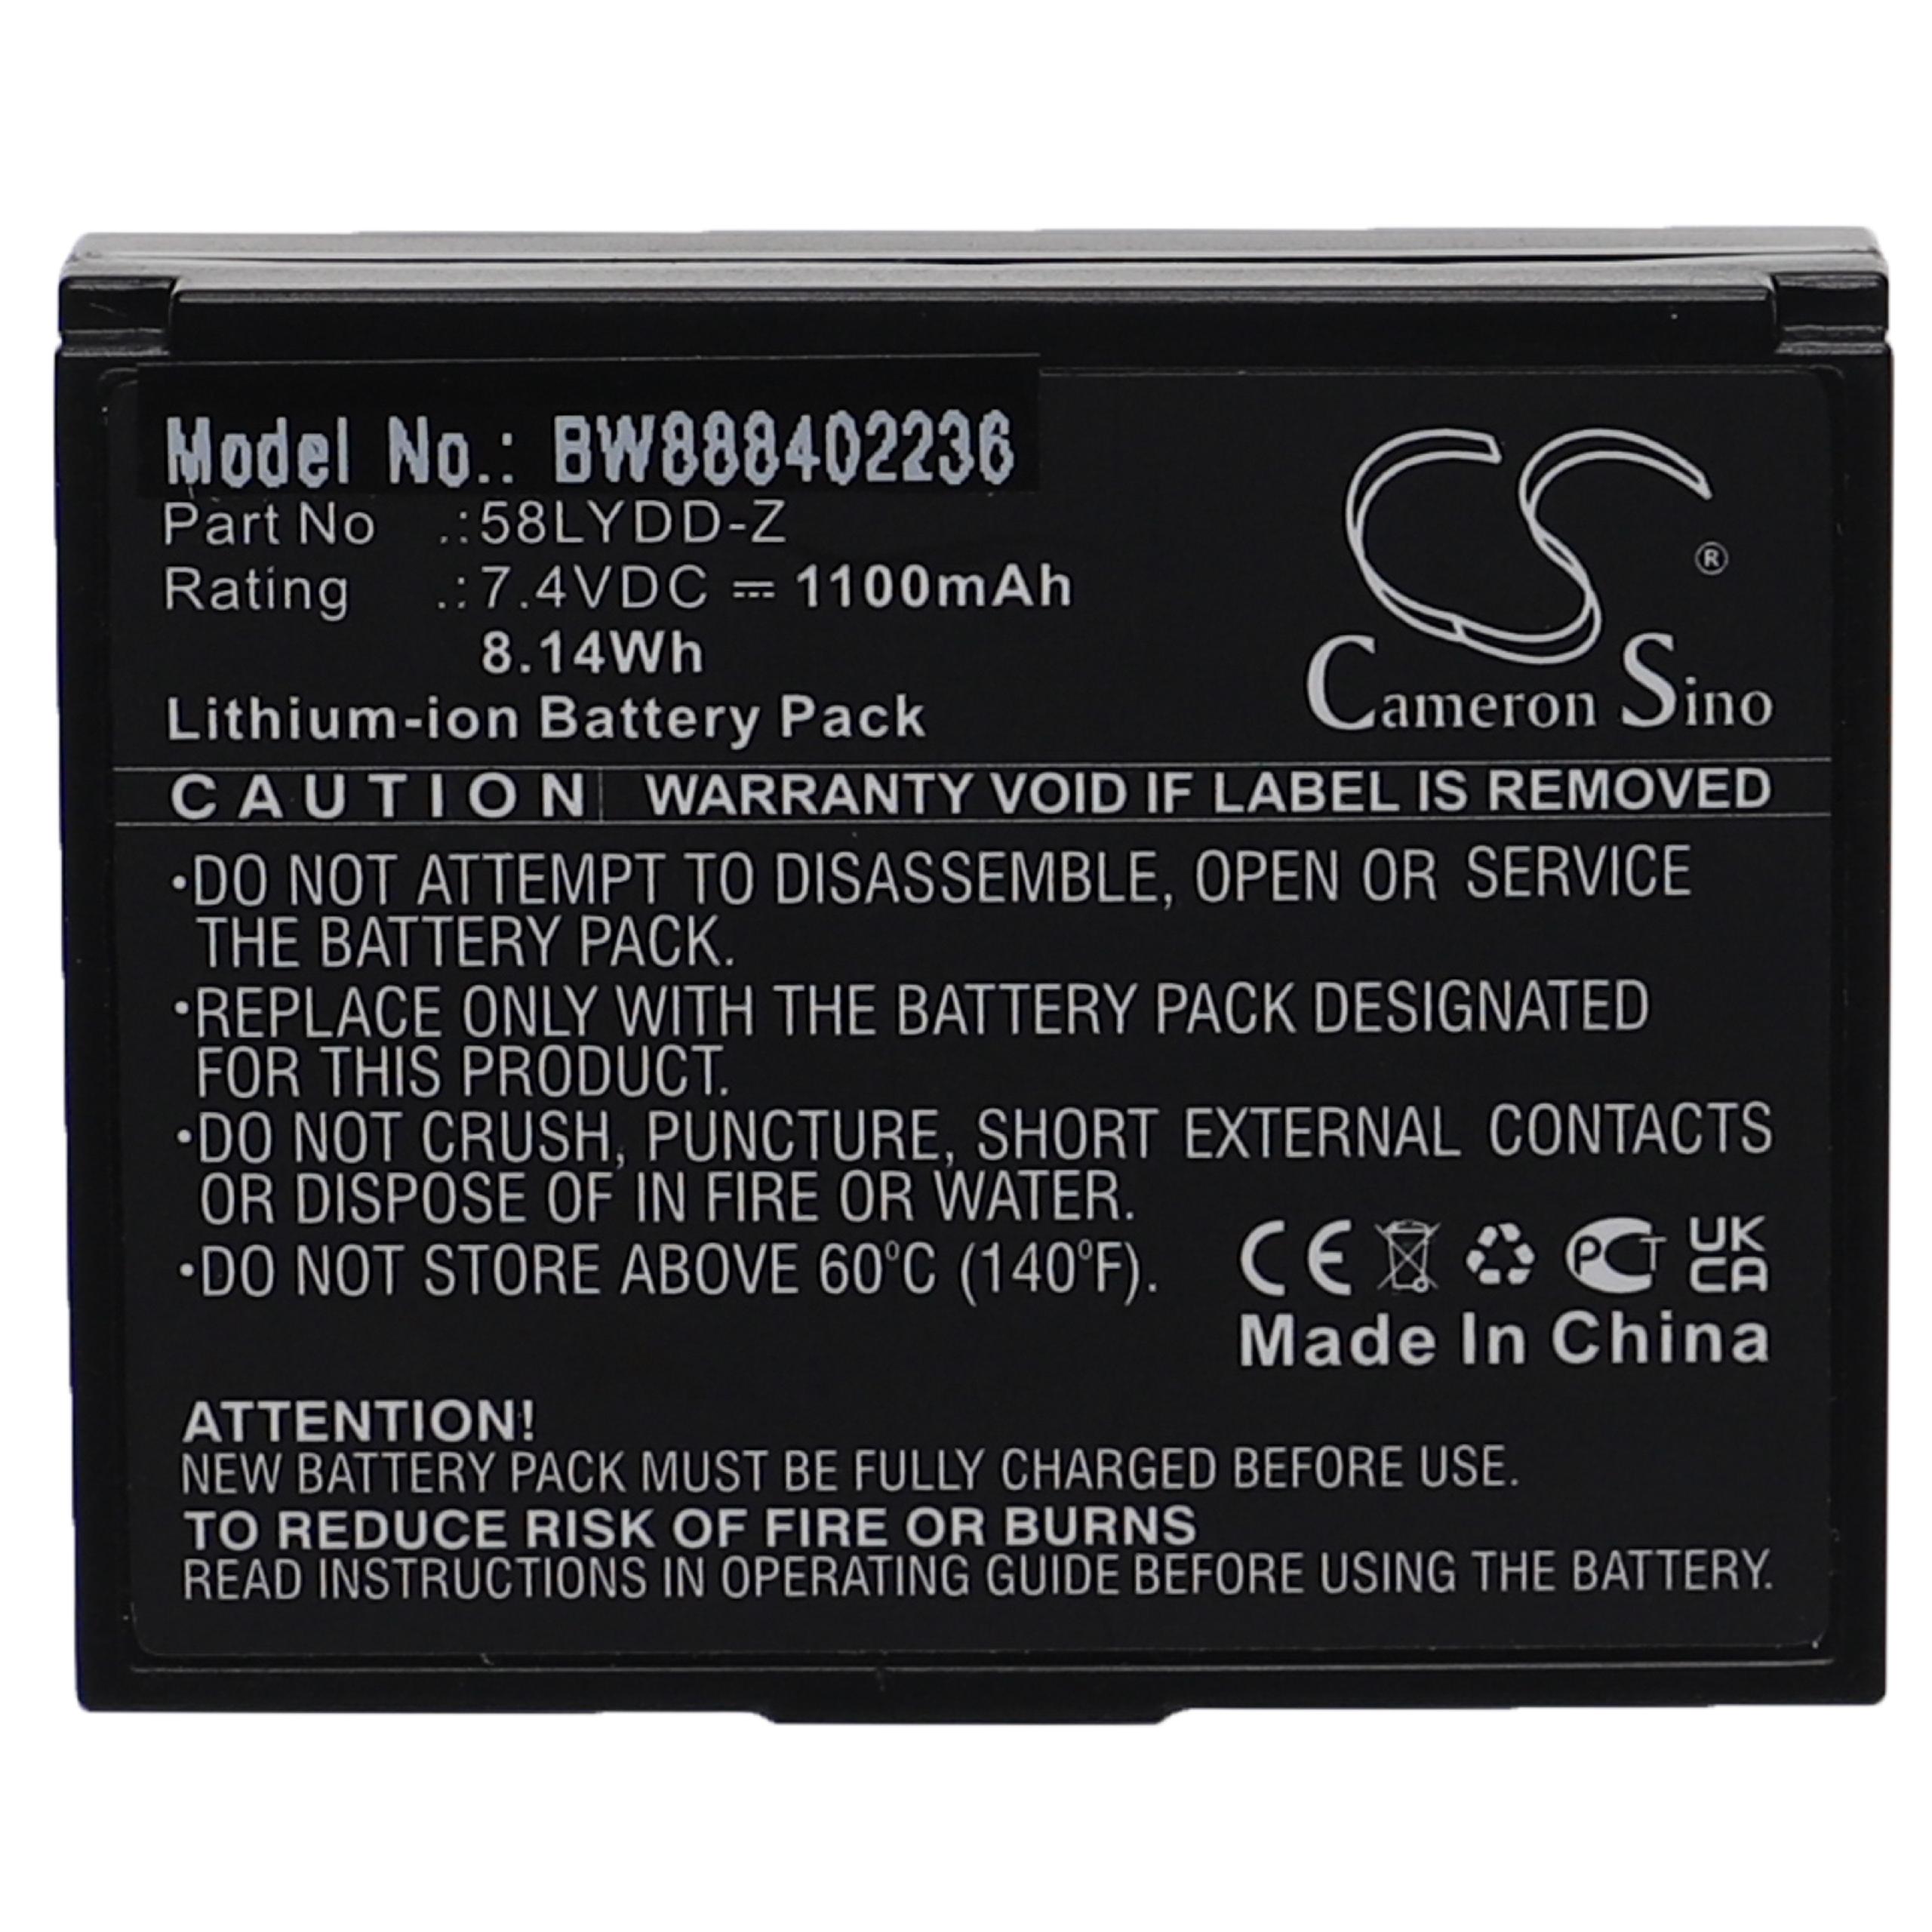 Printer Battery Replacement for Zjiang 58LYDD-Z - 1100mAh 7.4V Li-Ion